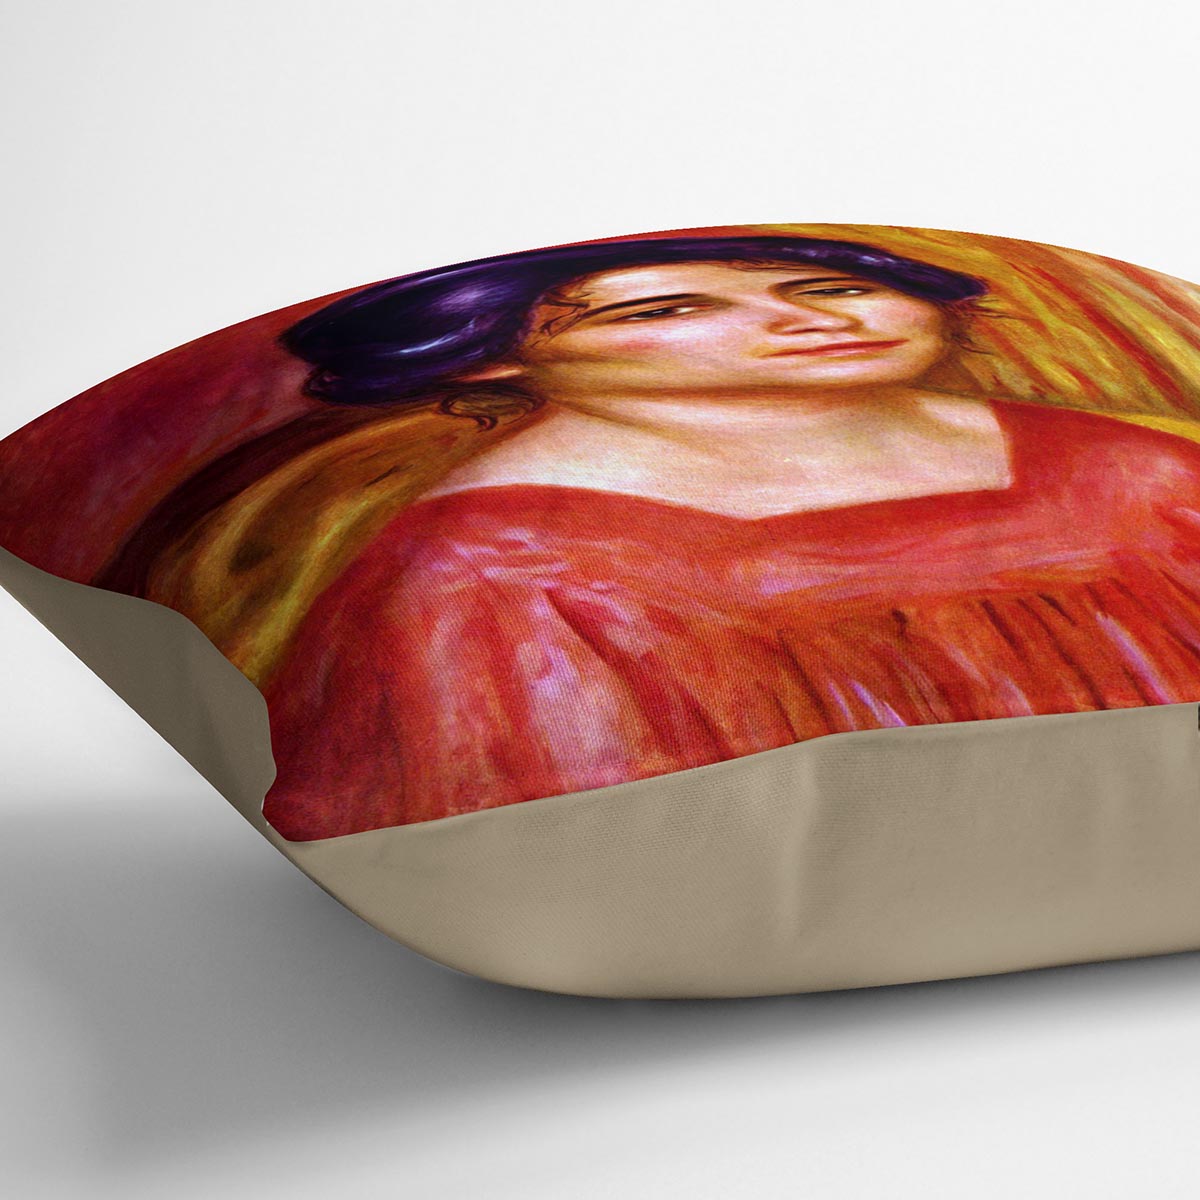 Gabrielle with red blouse by Renoir Cushion